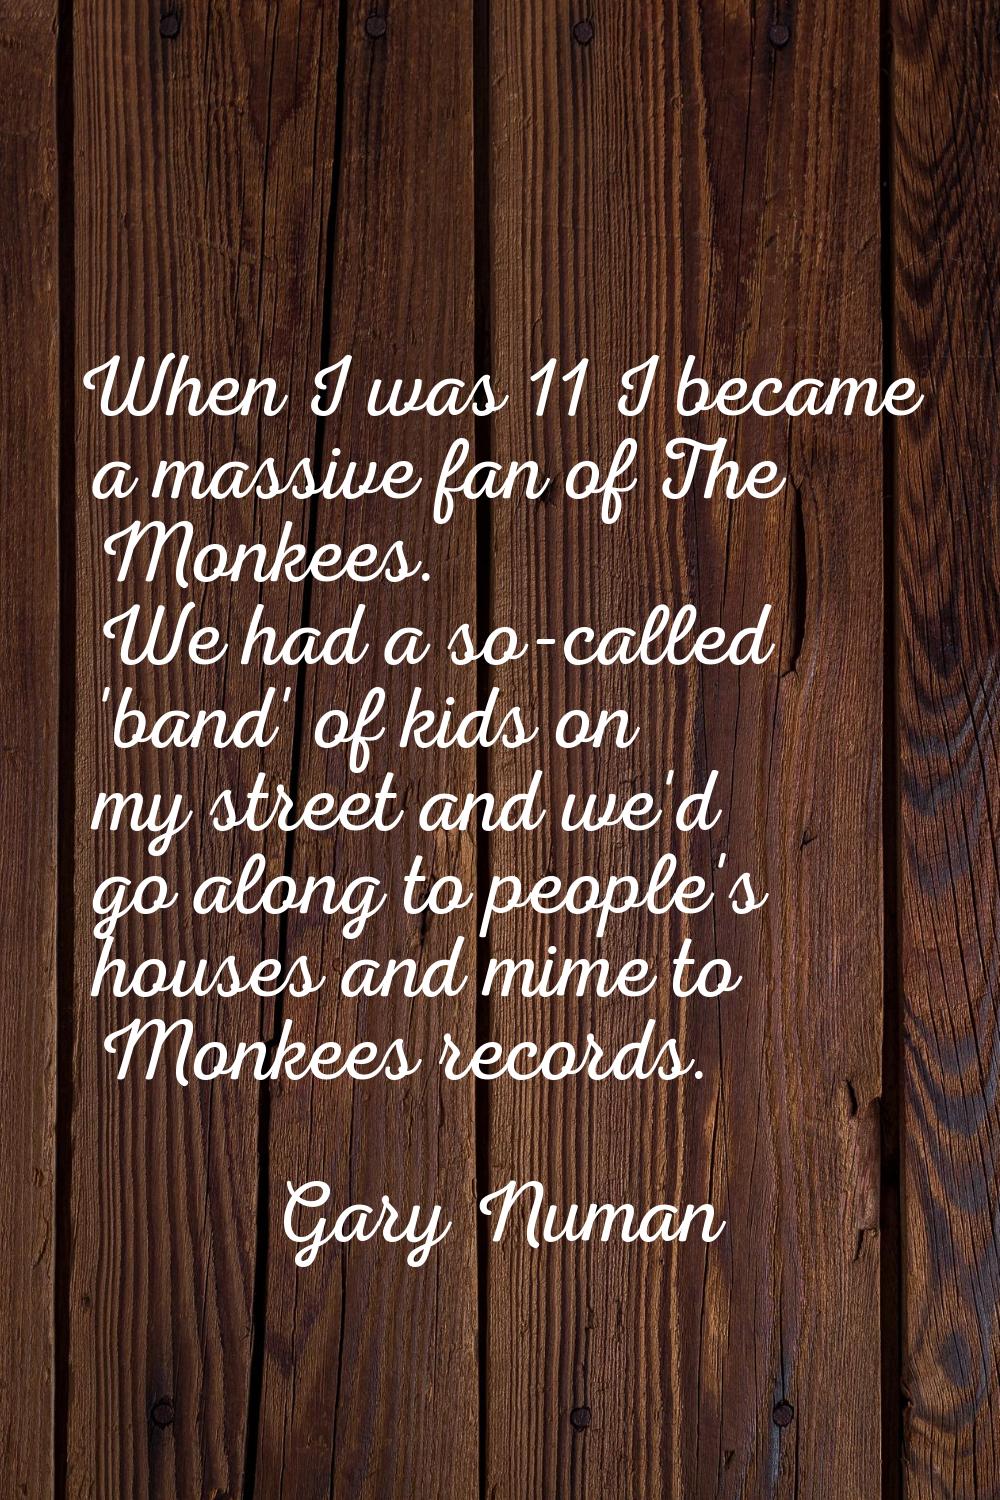 When I was 11 I became a massive fan of The Monkees. We had a so-called 'band' of kids on my street